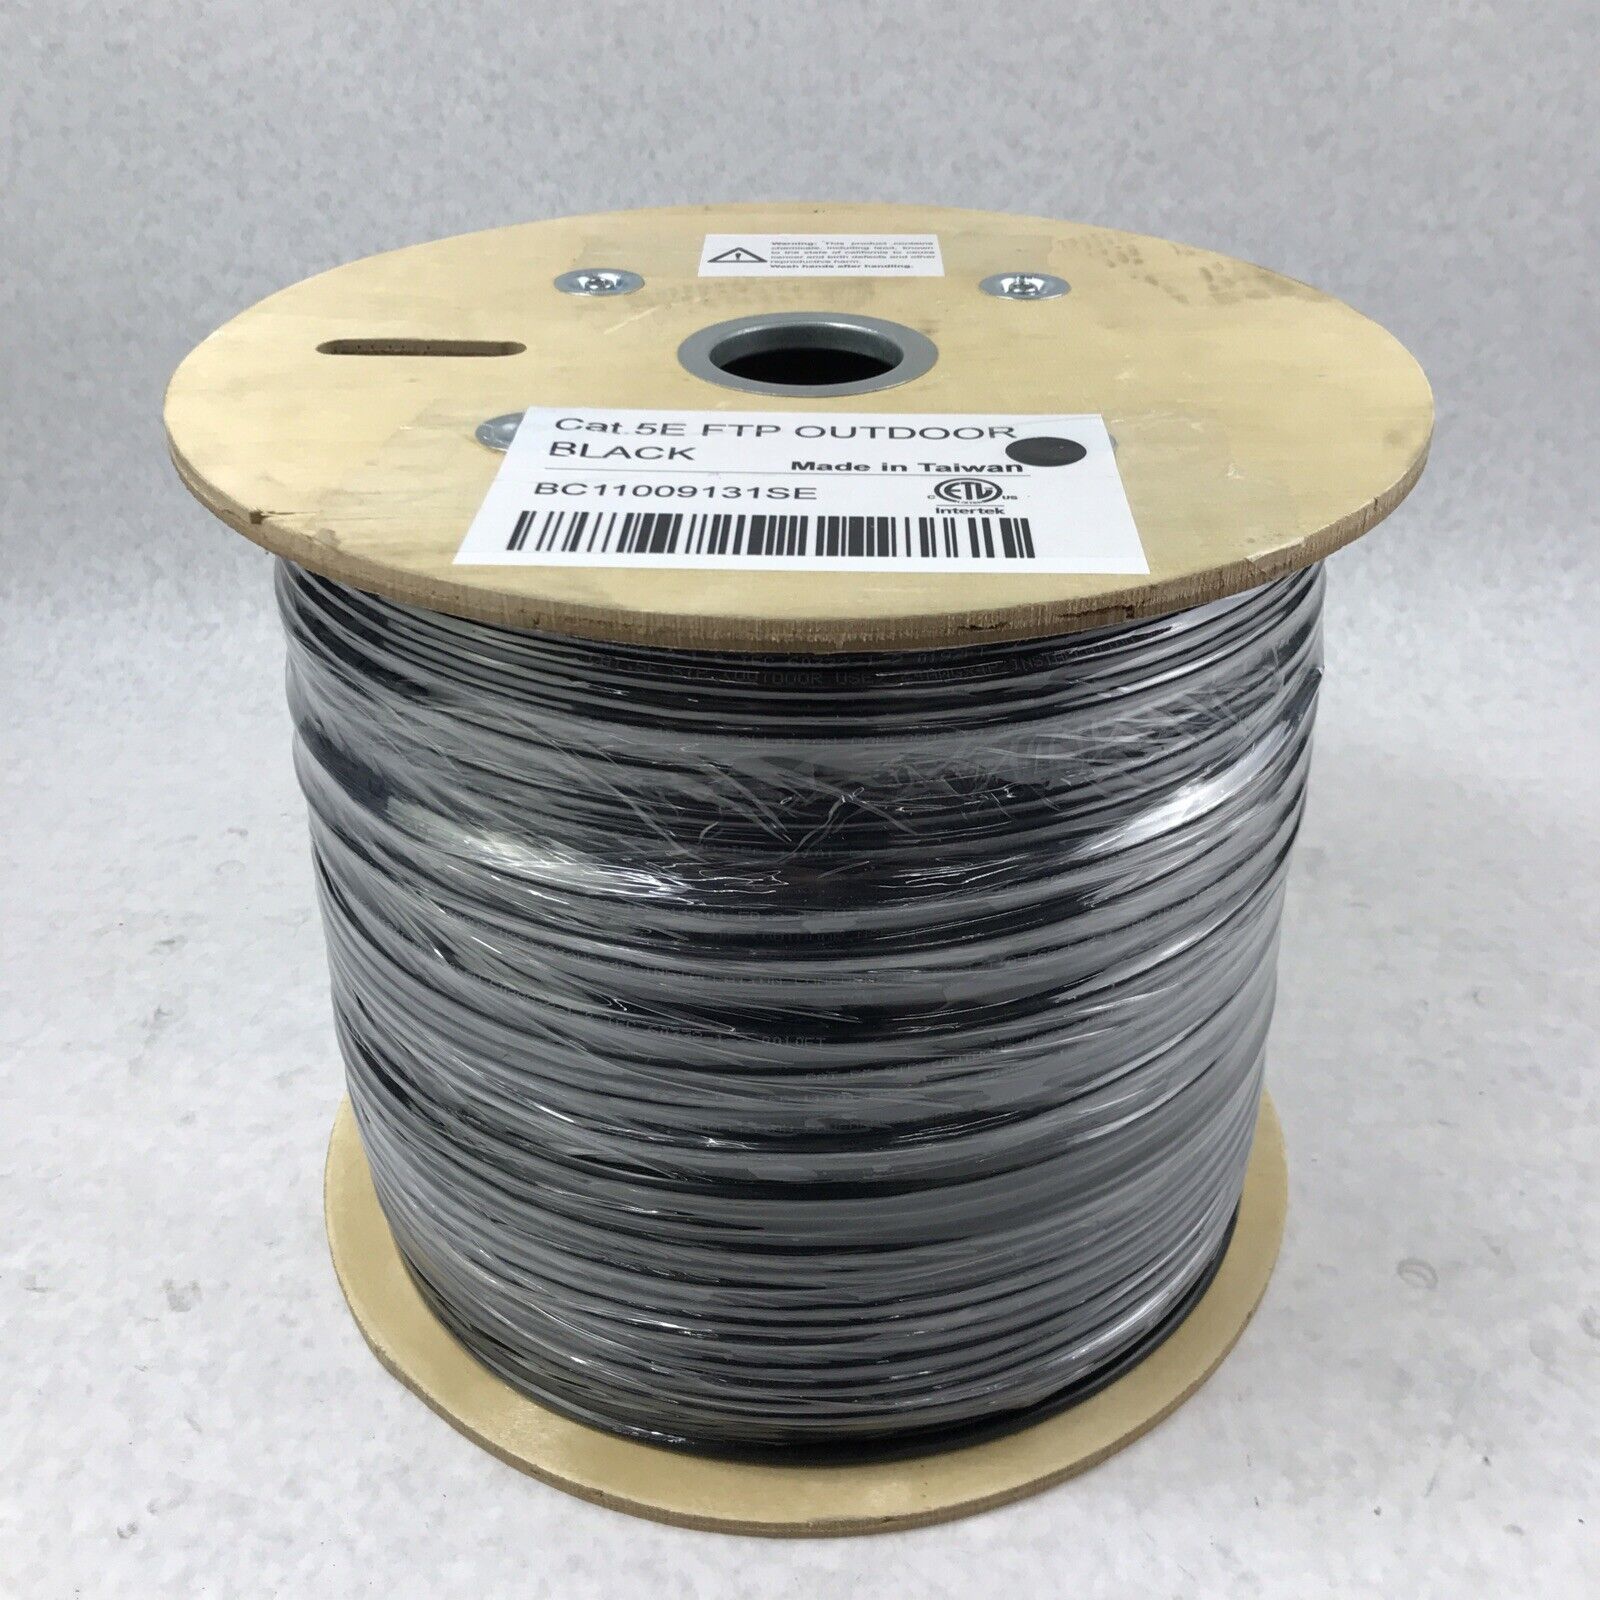 Cat5E FTP Outdoor Use 24AWGX4P 1000ft Black Ethernet Wire